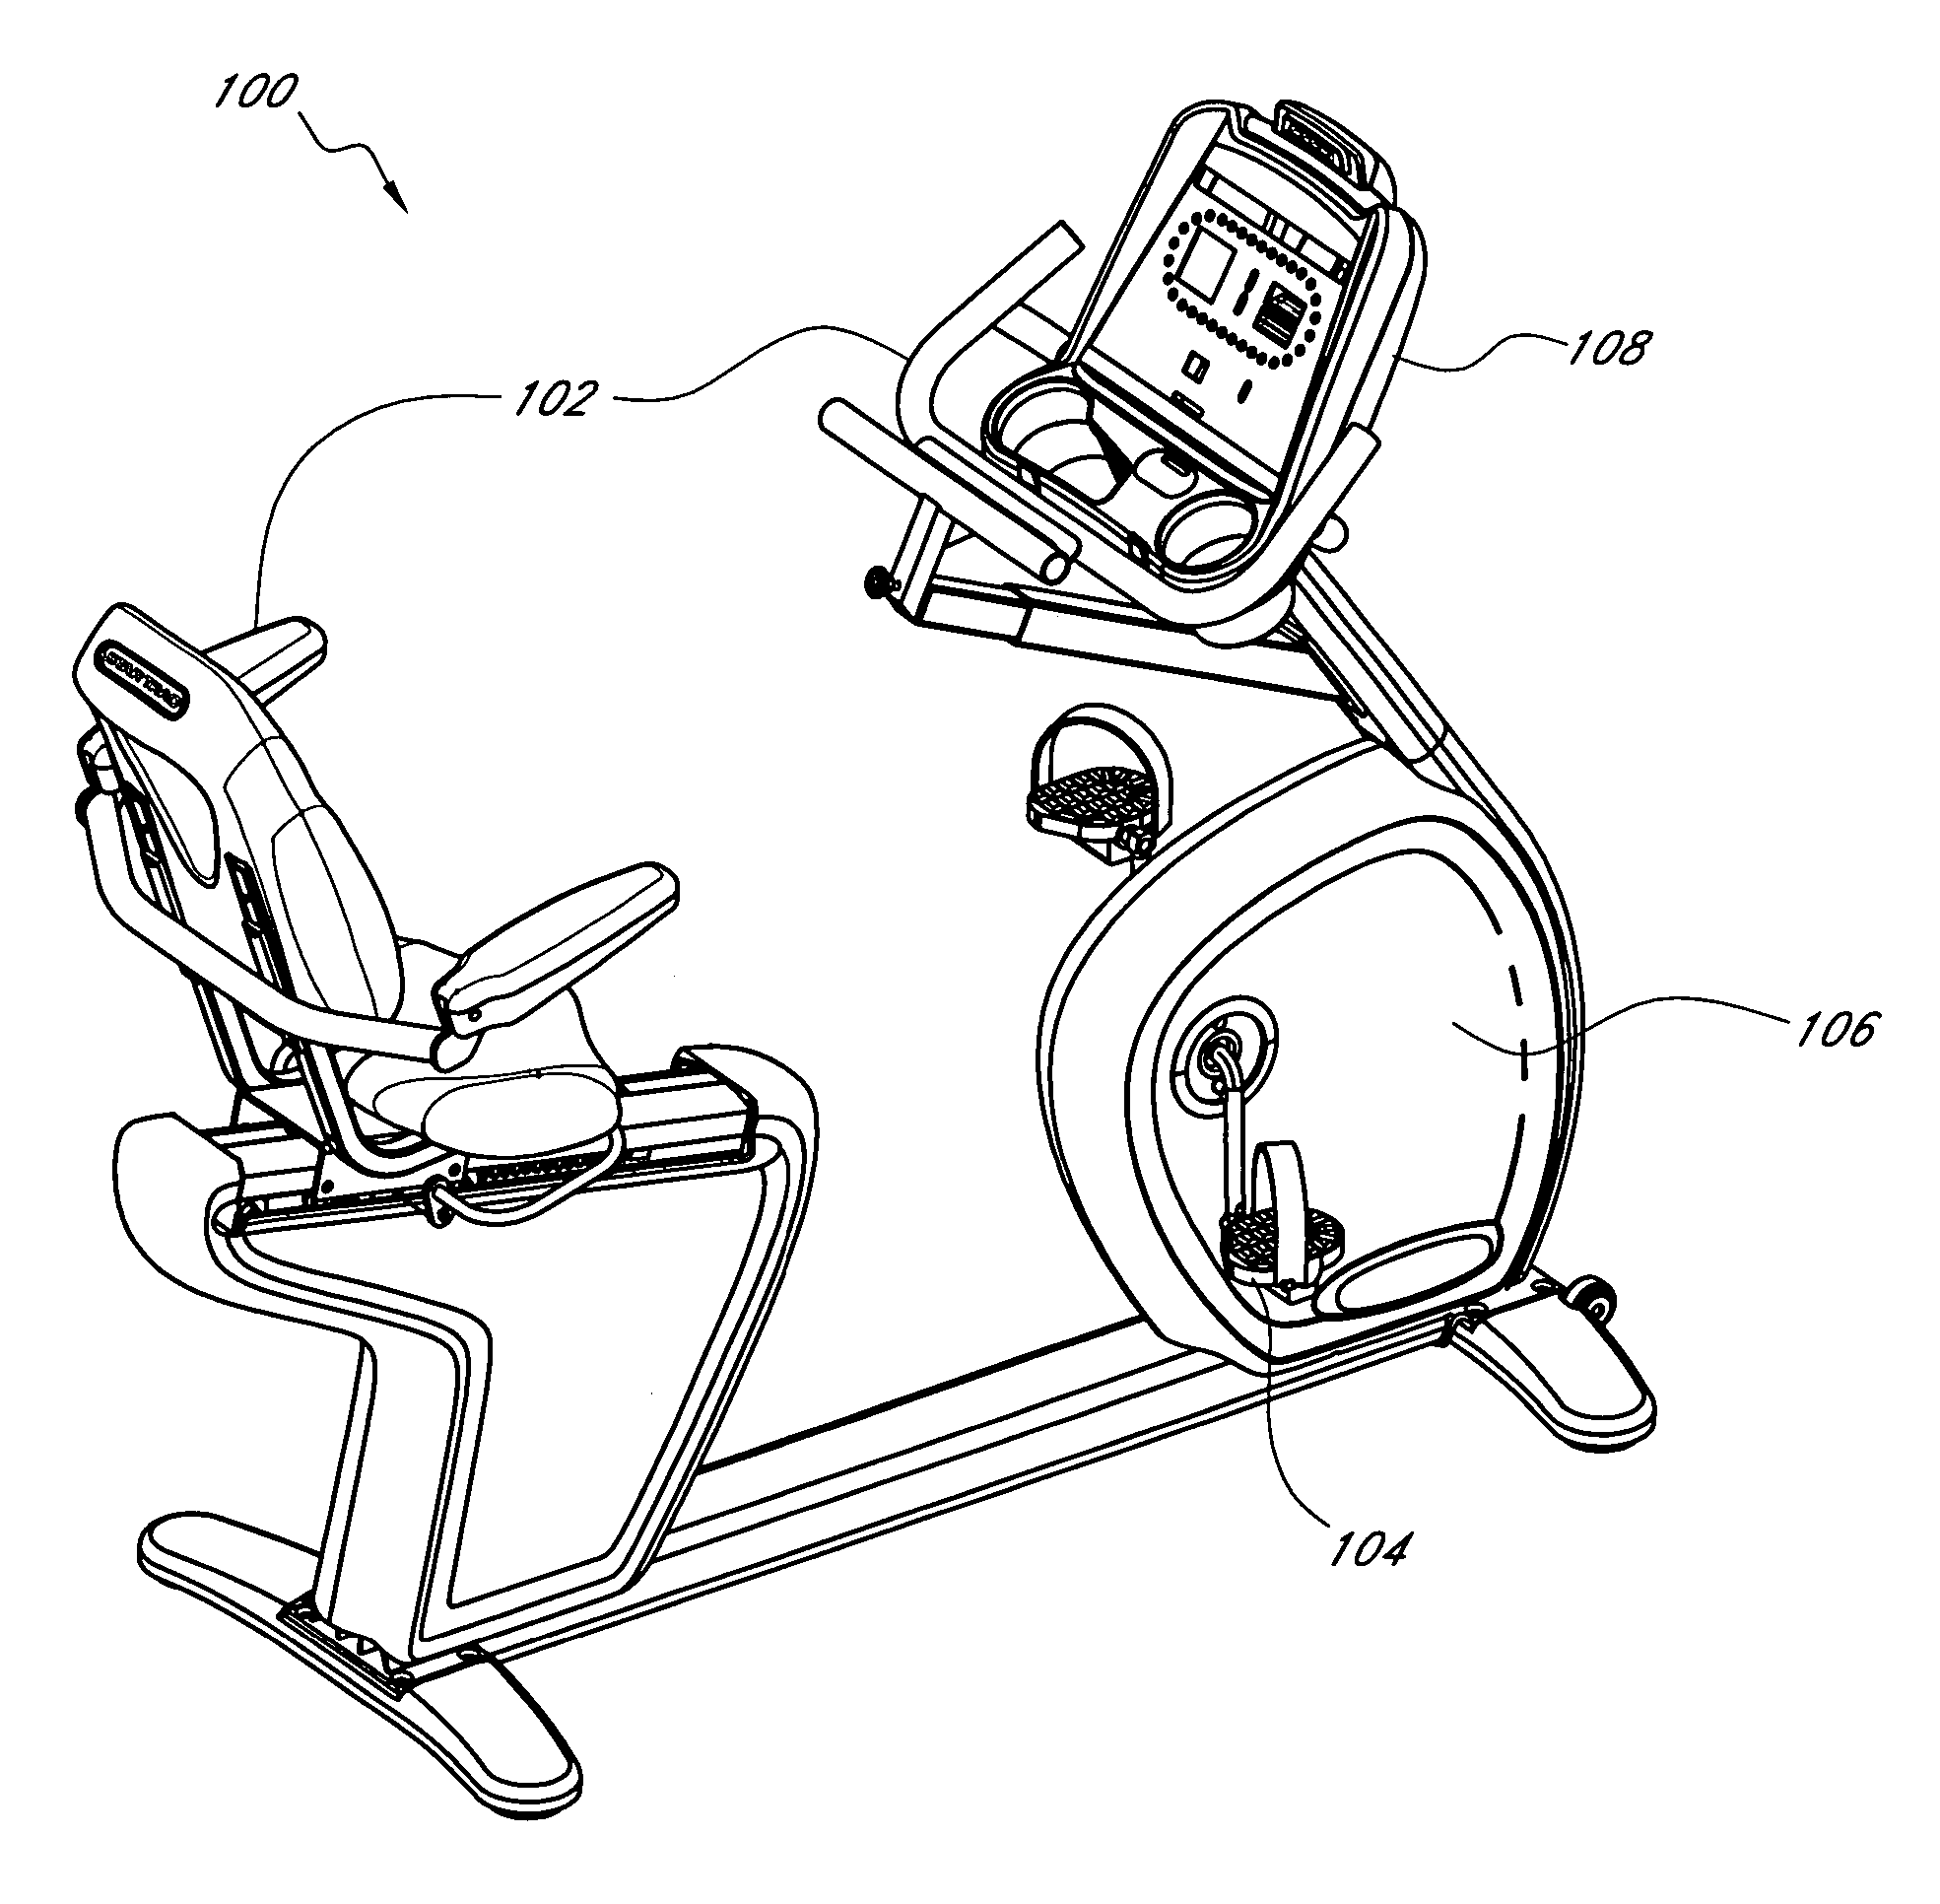 System and method for electronically controlling resistance of an exercise machine